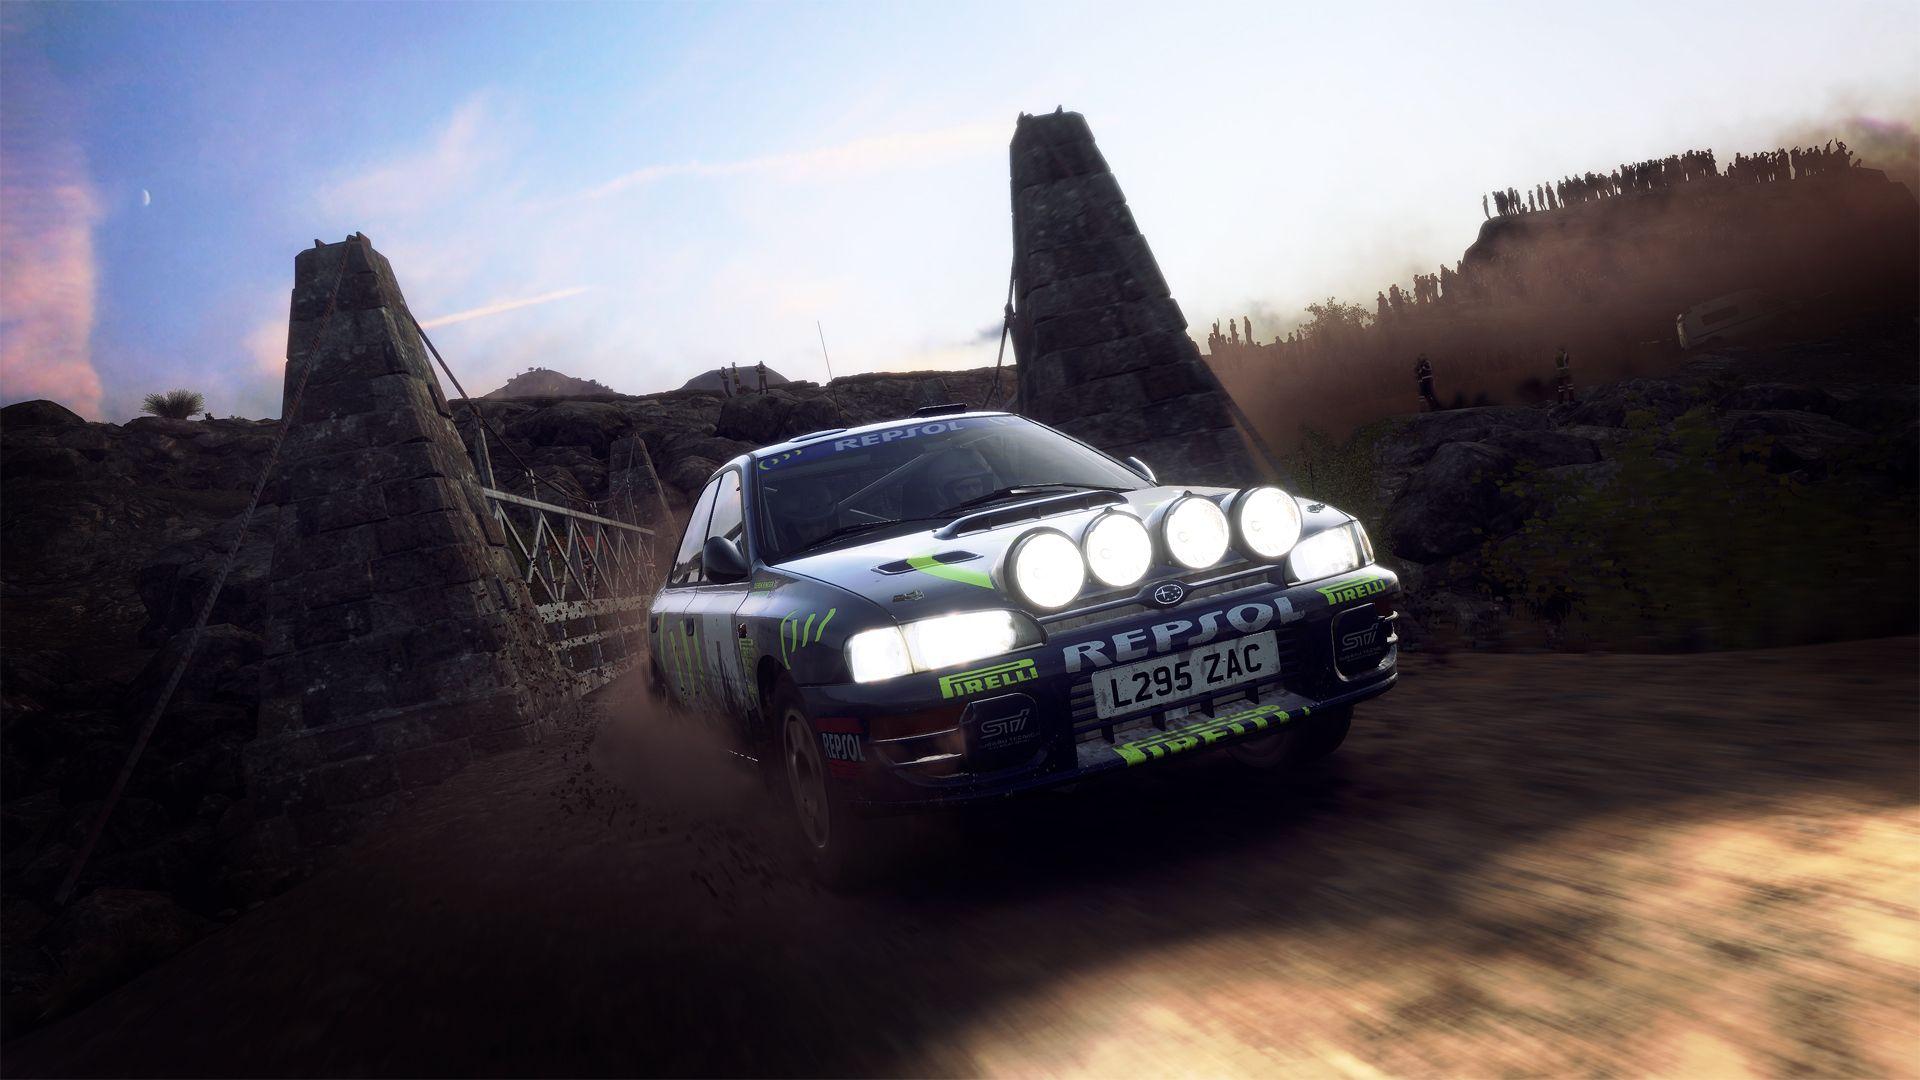 Introducing: the DiRT Rally 2.0 dev insight series!